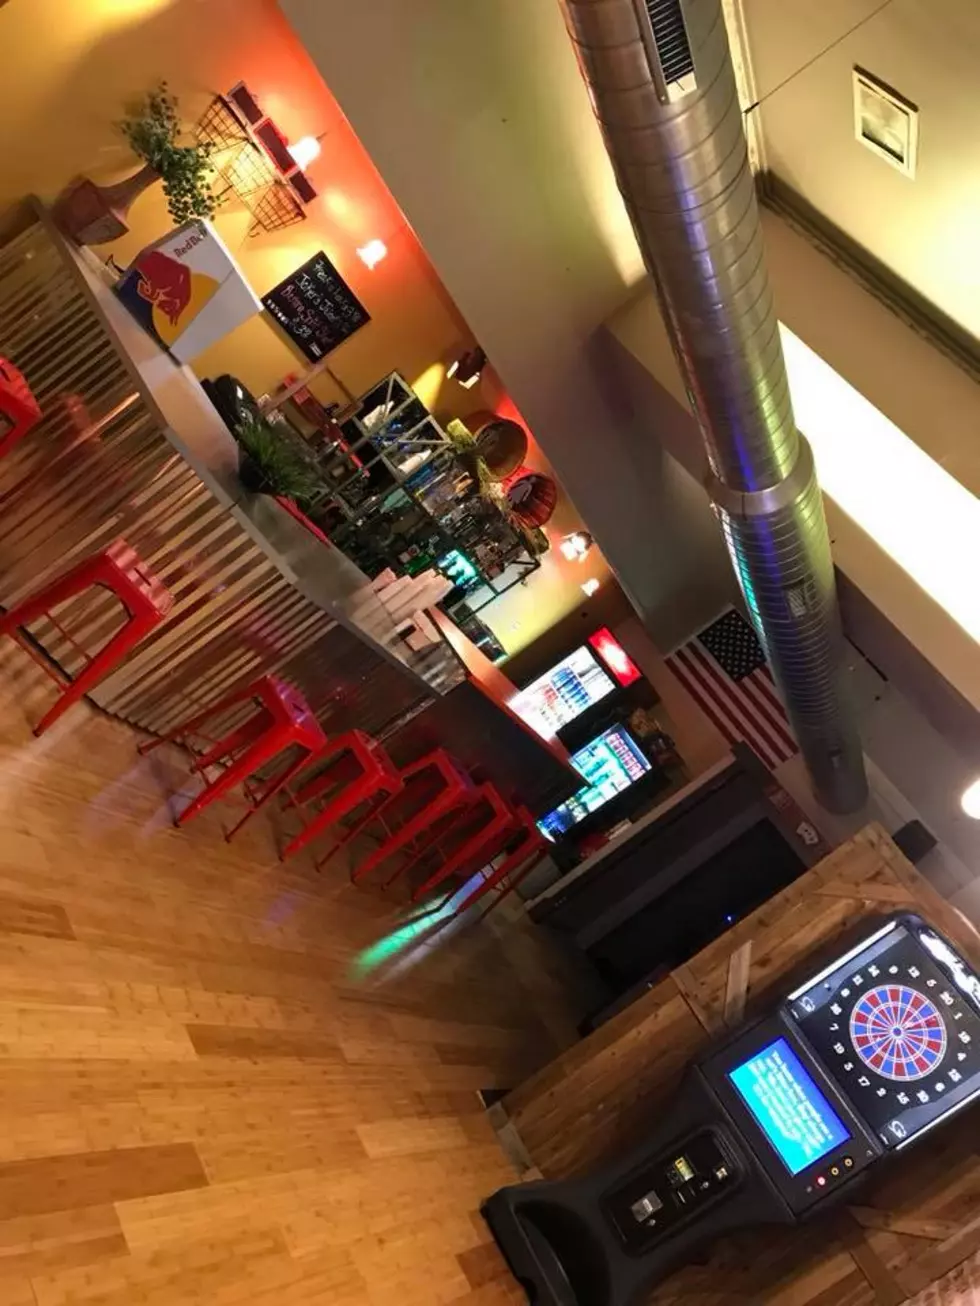 Quincy’s Newest Bar Looks Like The Most Fun Place EVER!